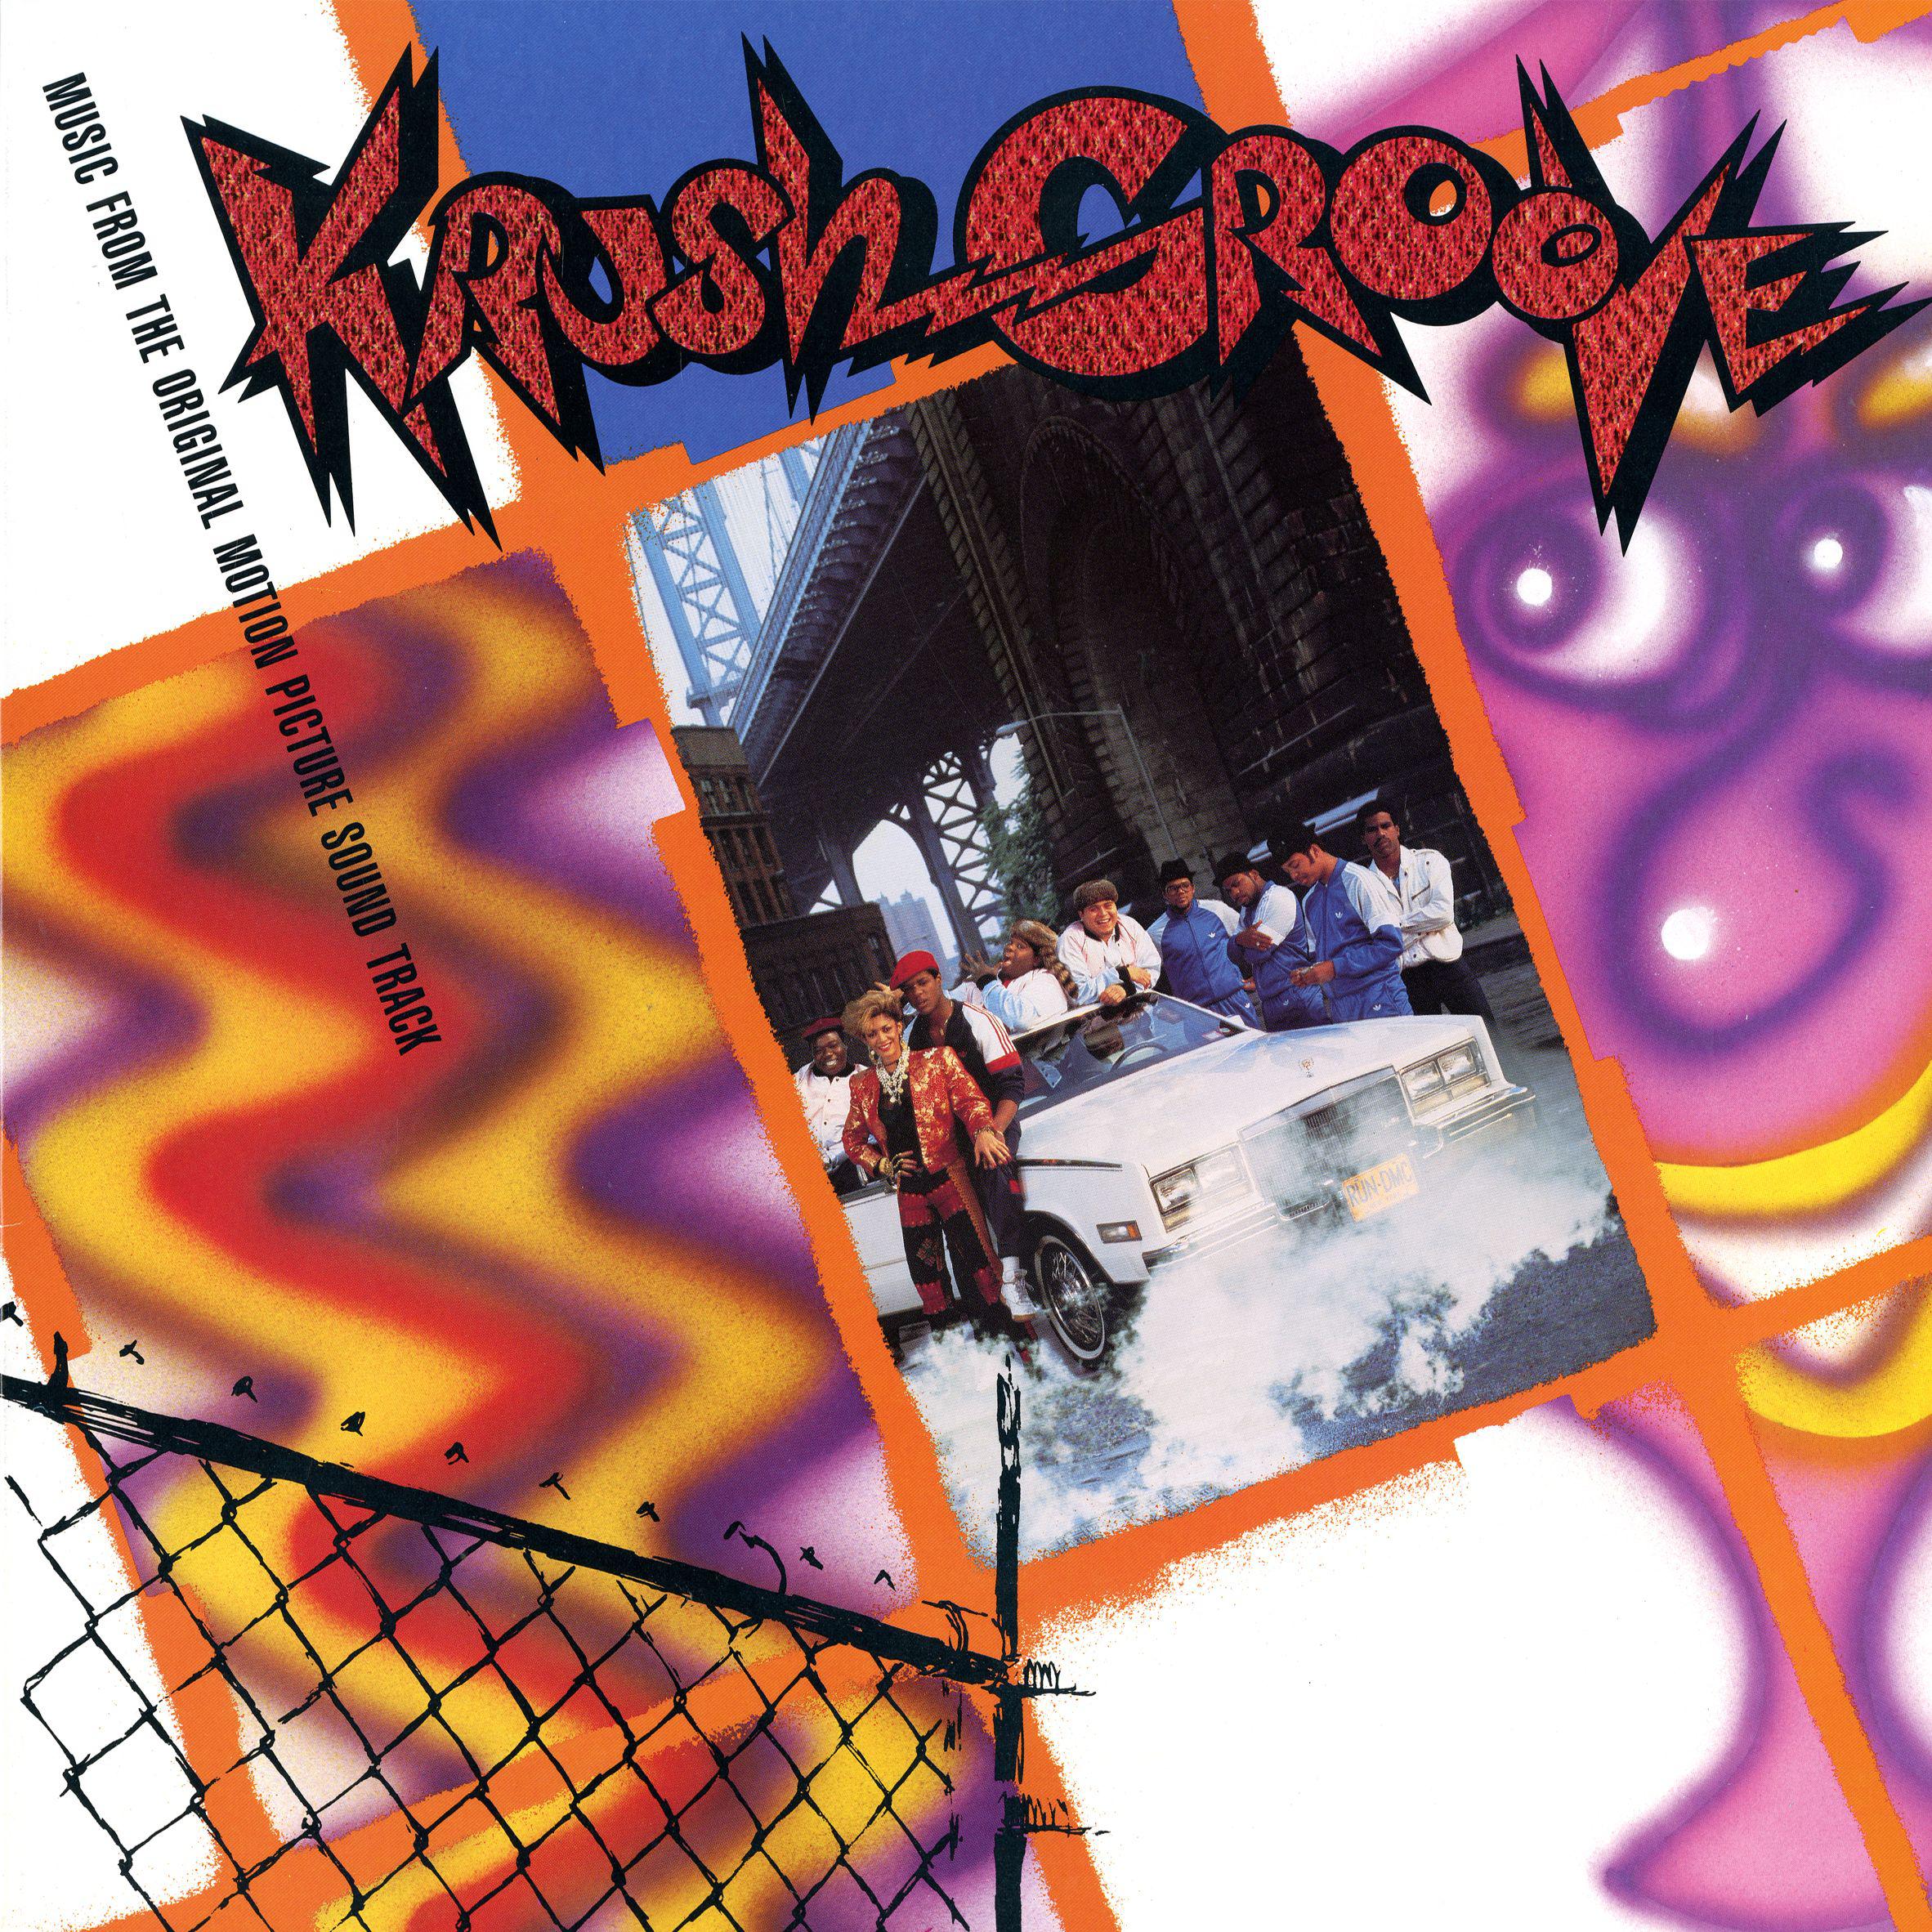 Krush Groove - Music from the Original Motion Picture